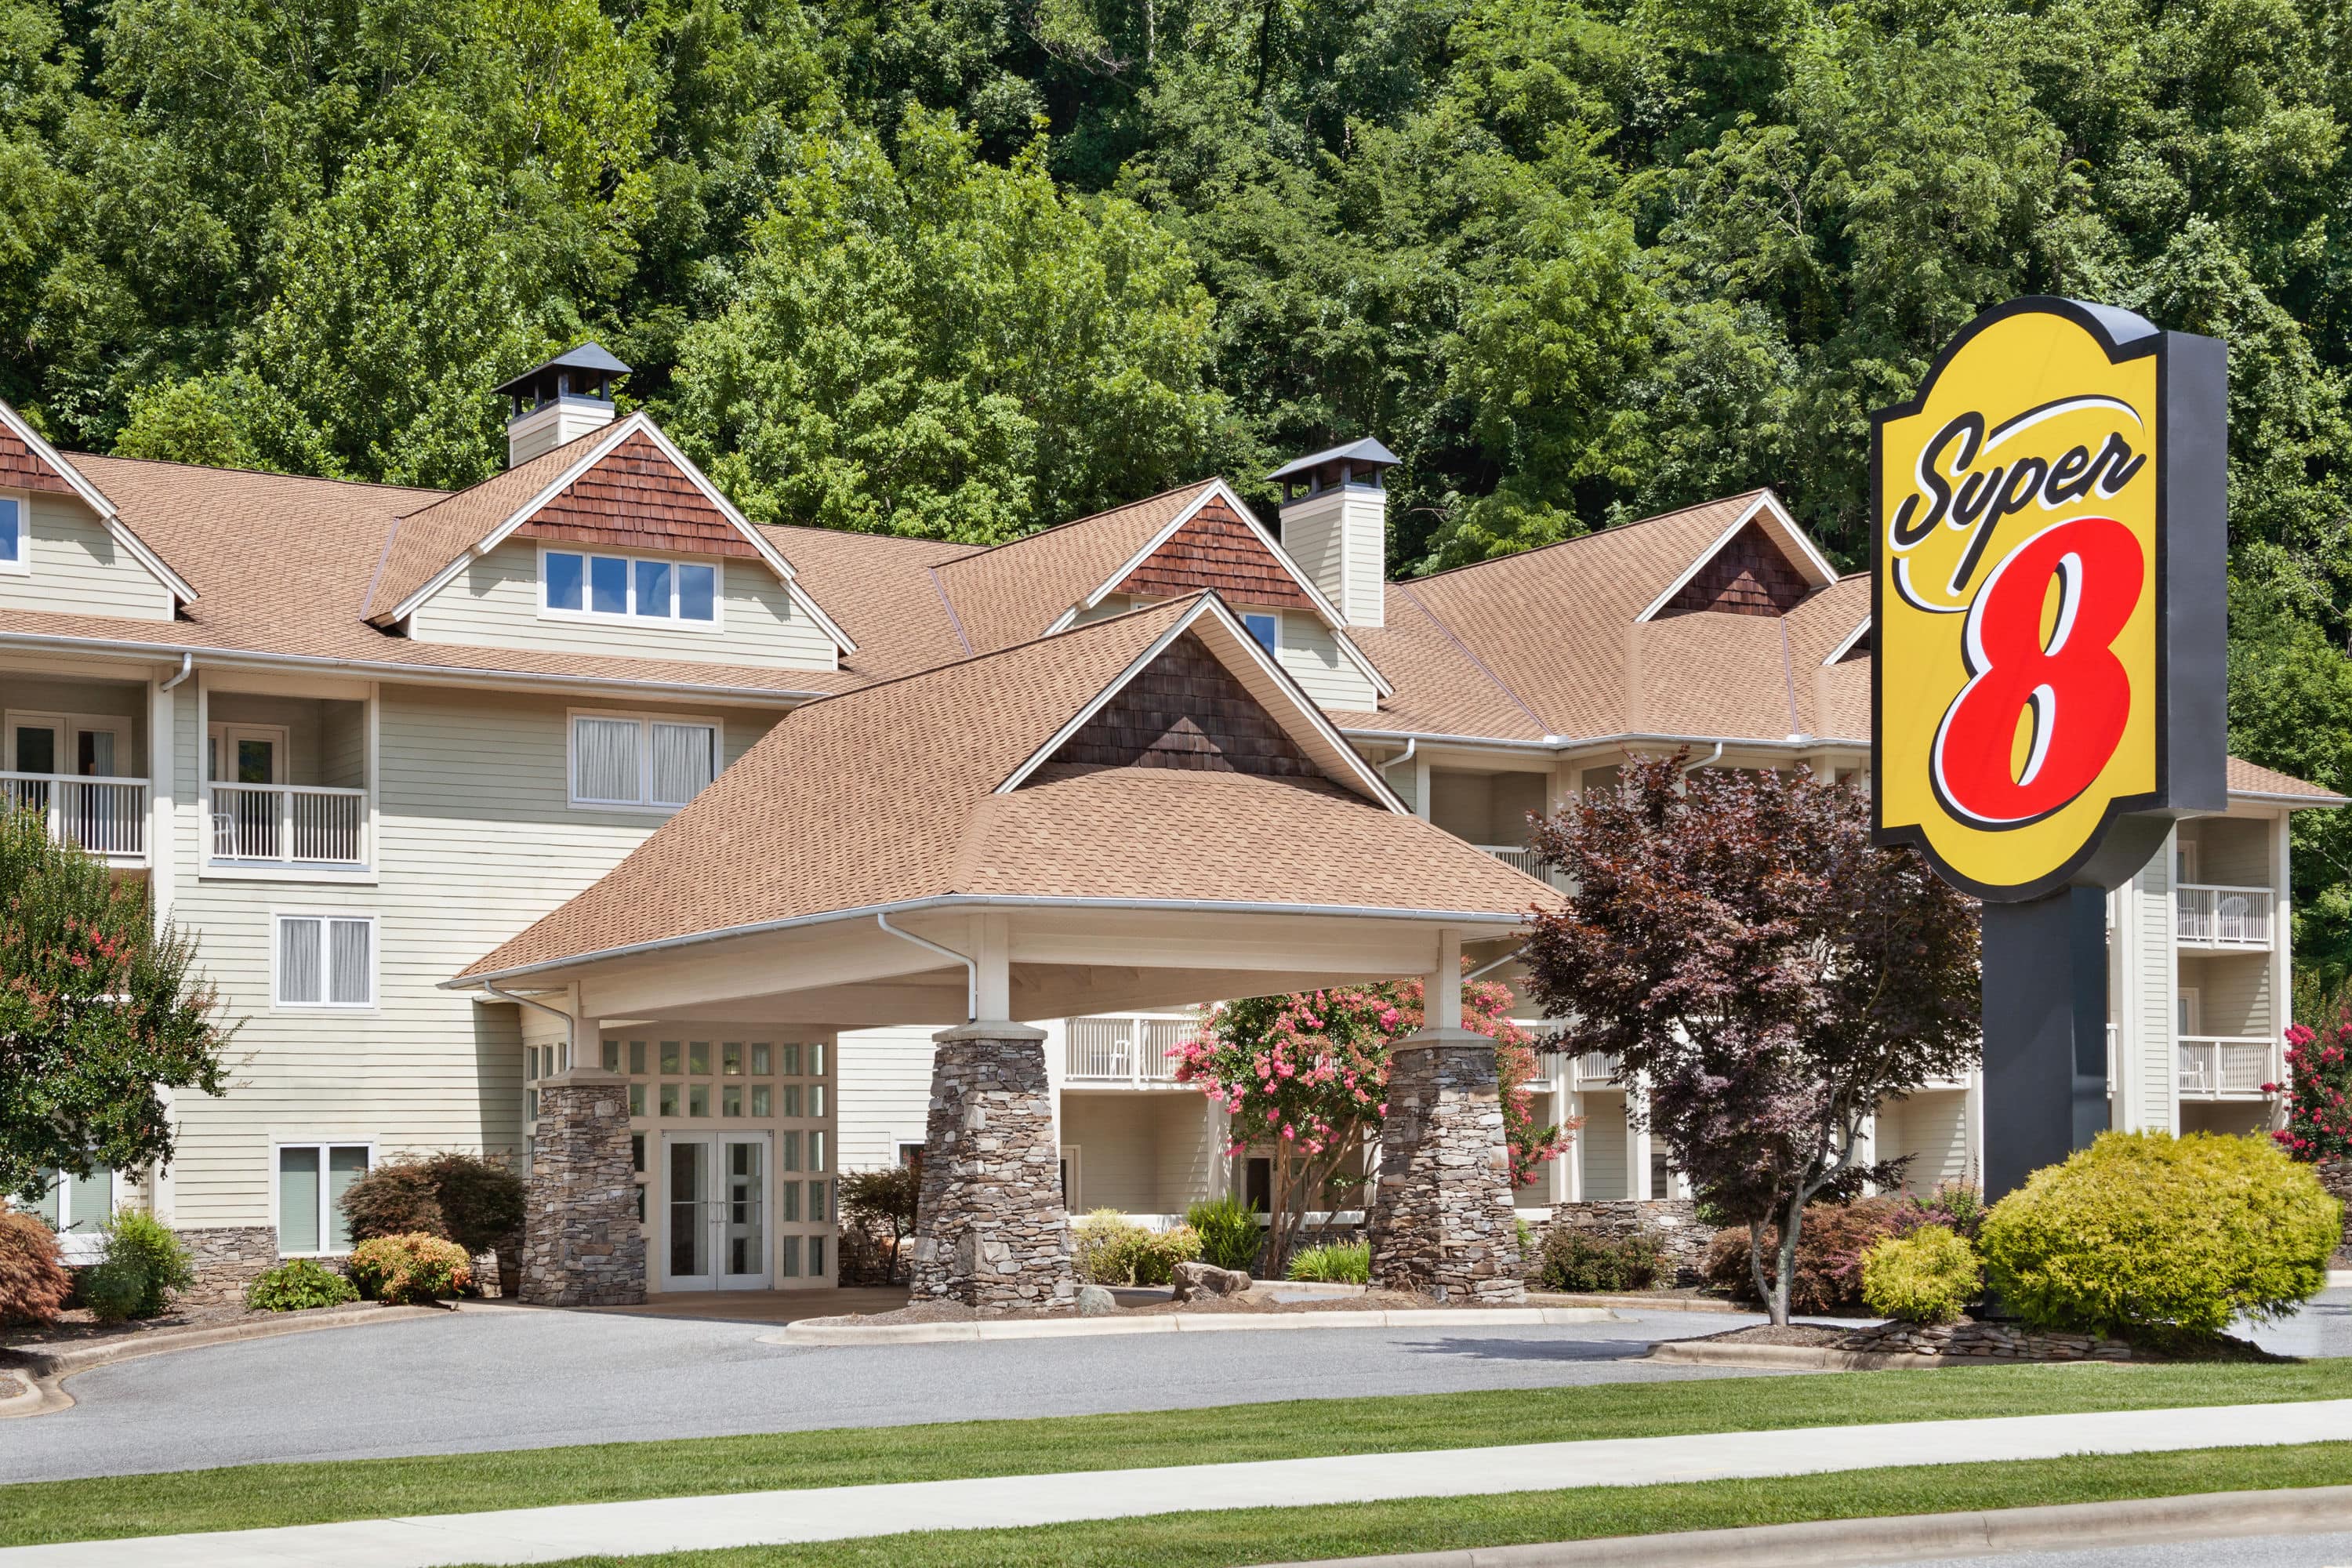 cherokee nc hotels with shuttle to casino